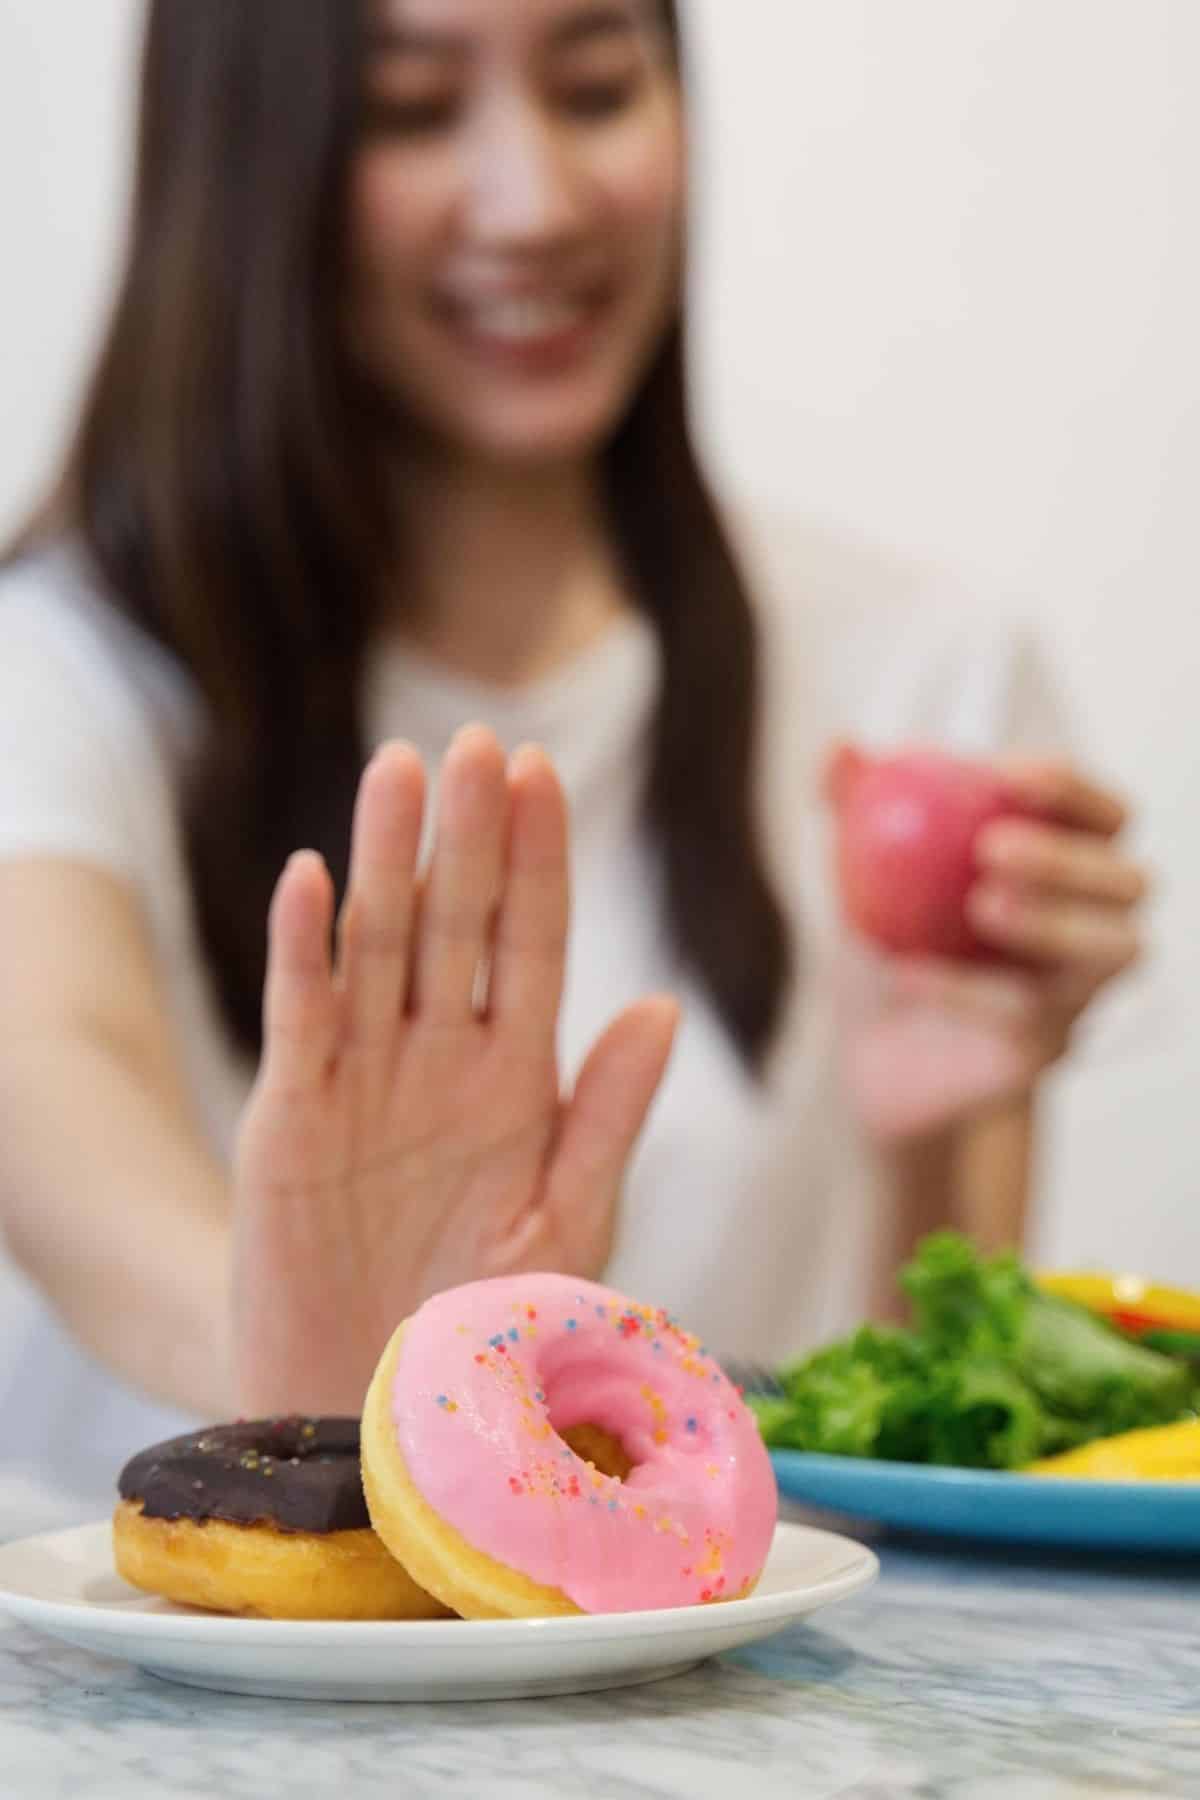 woman pushing away a donut in favor of healthier foods.